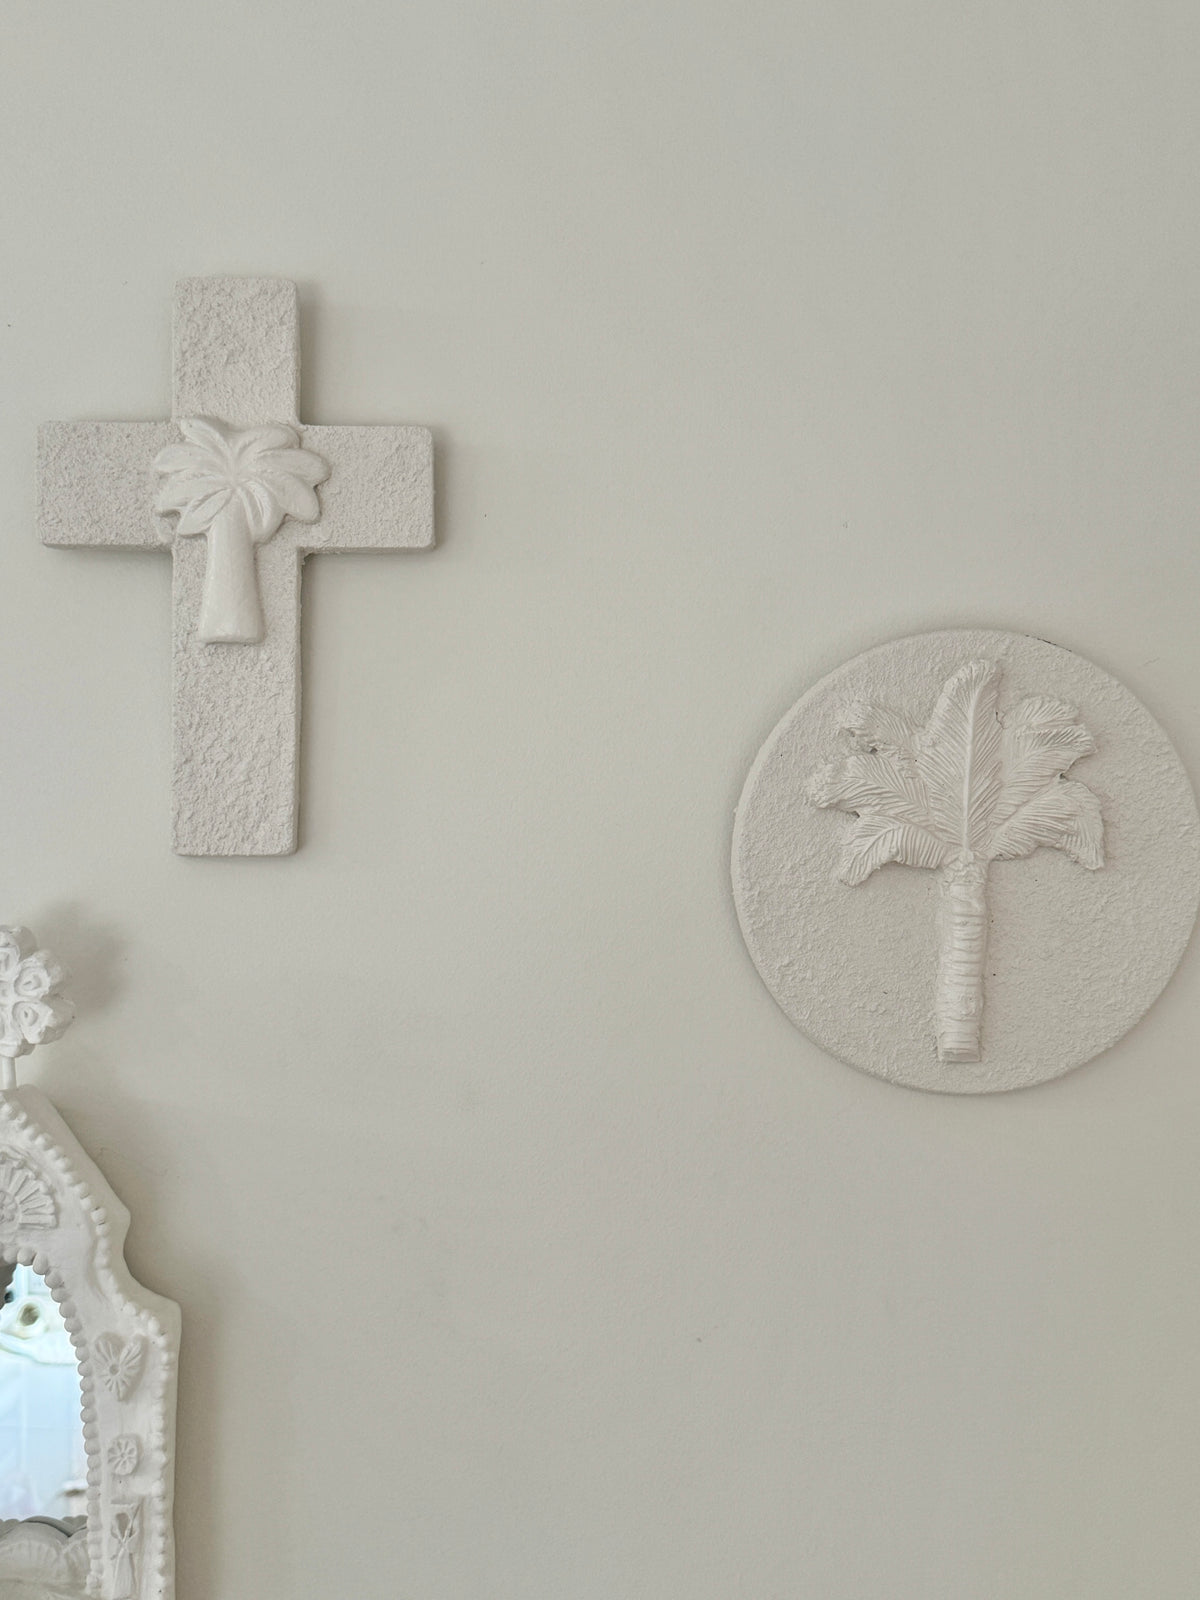 Wall Tile - White Palm - Large Cross